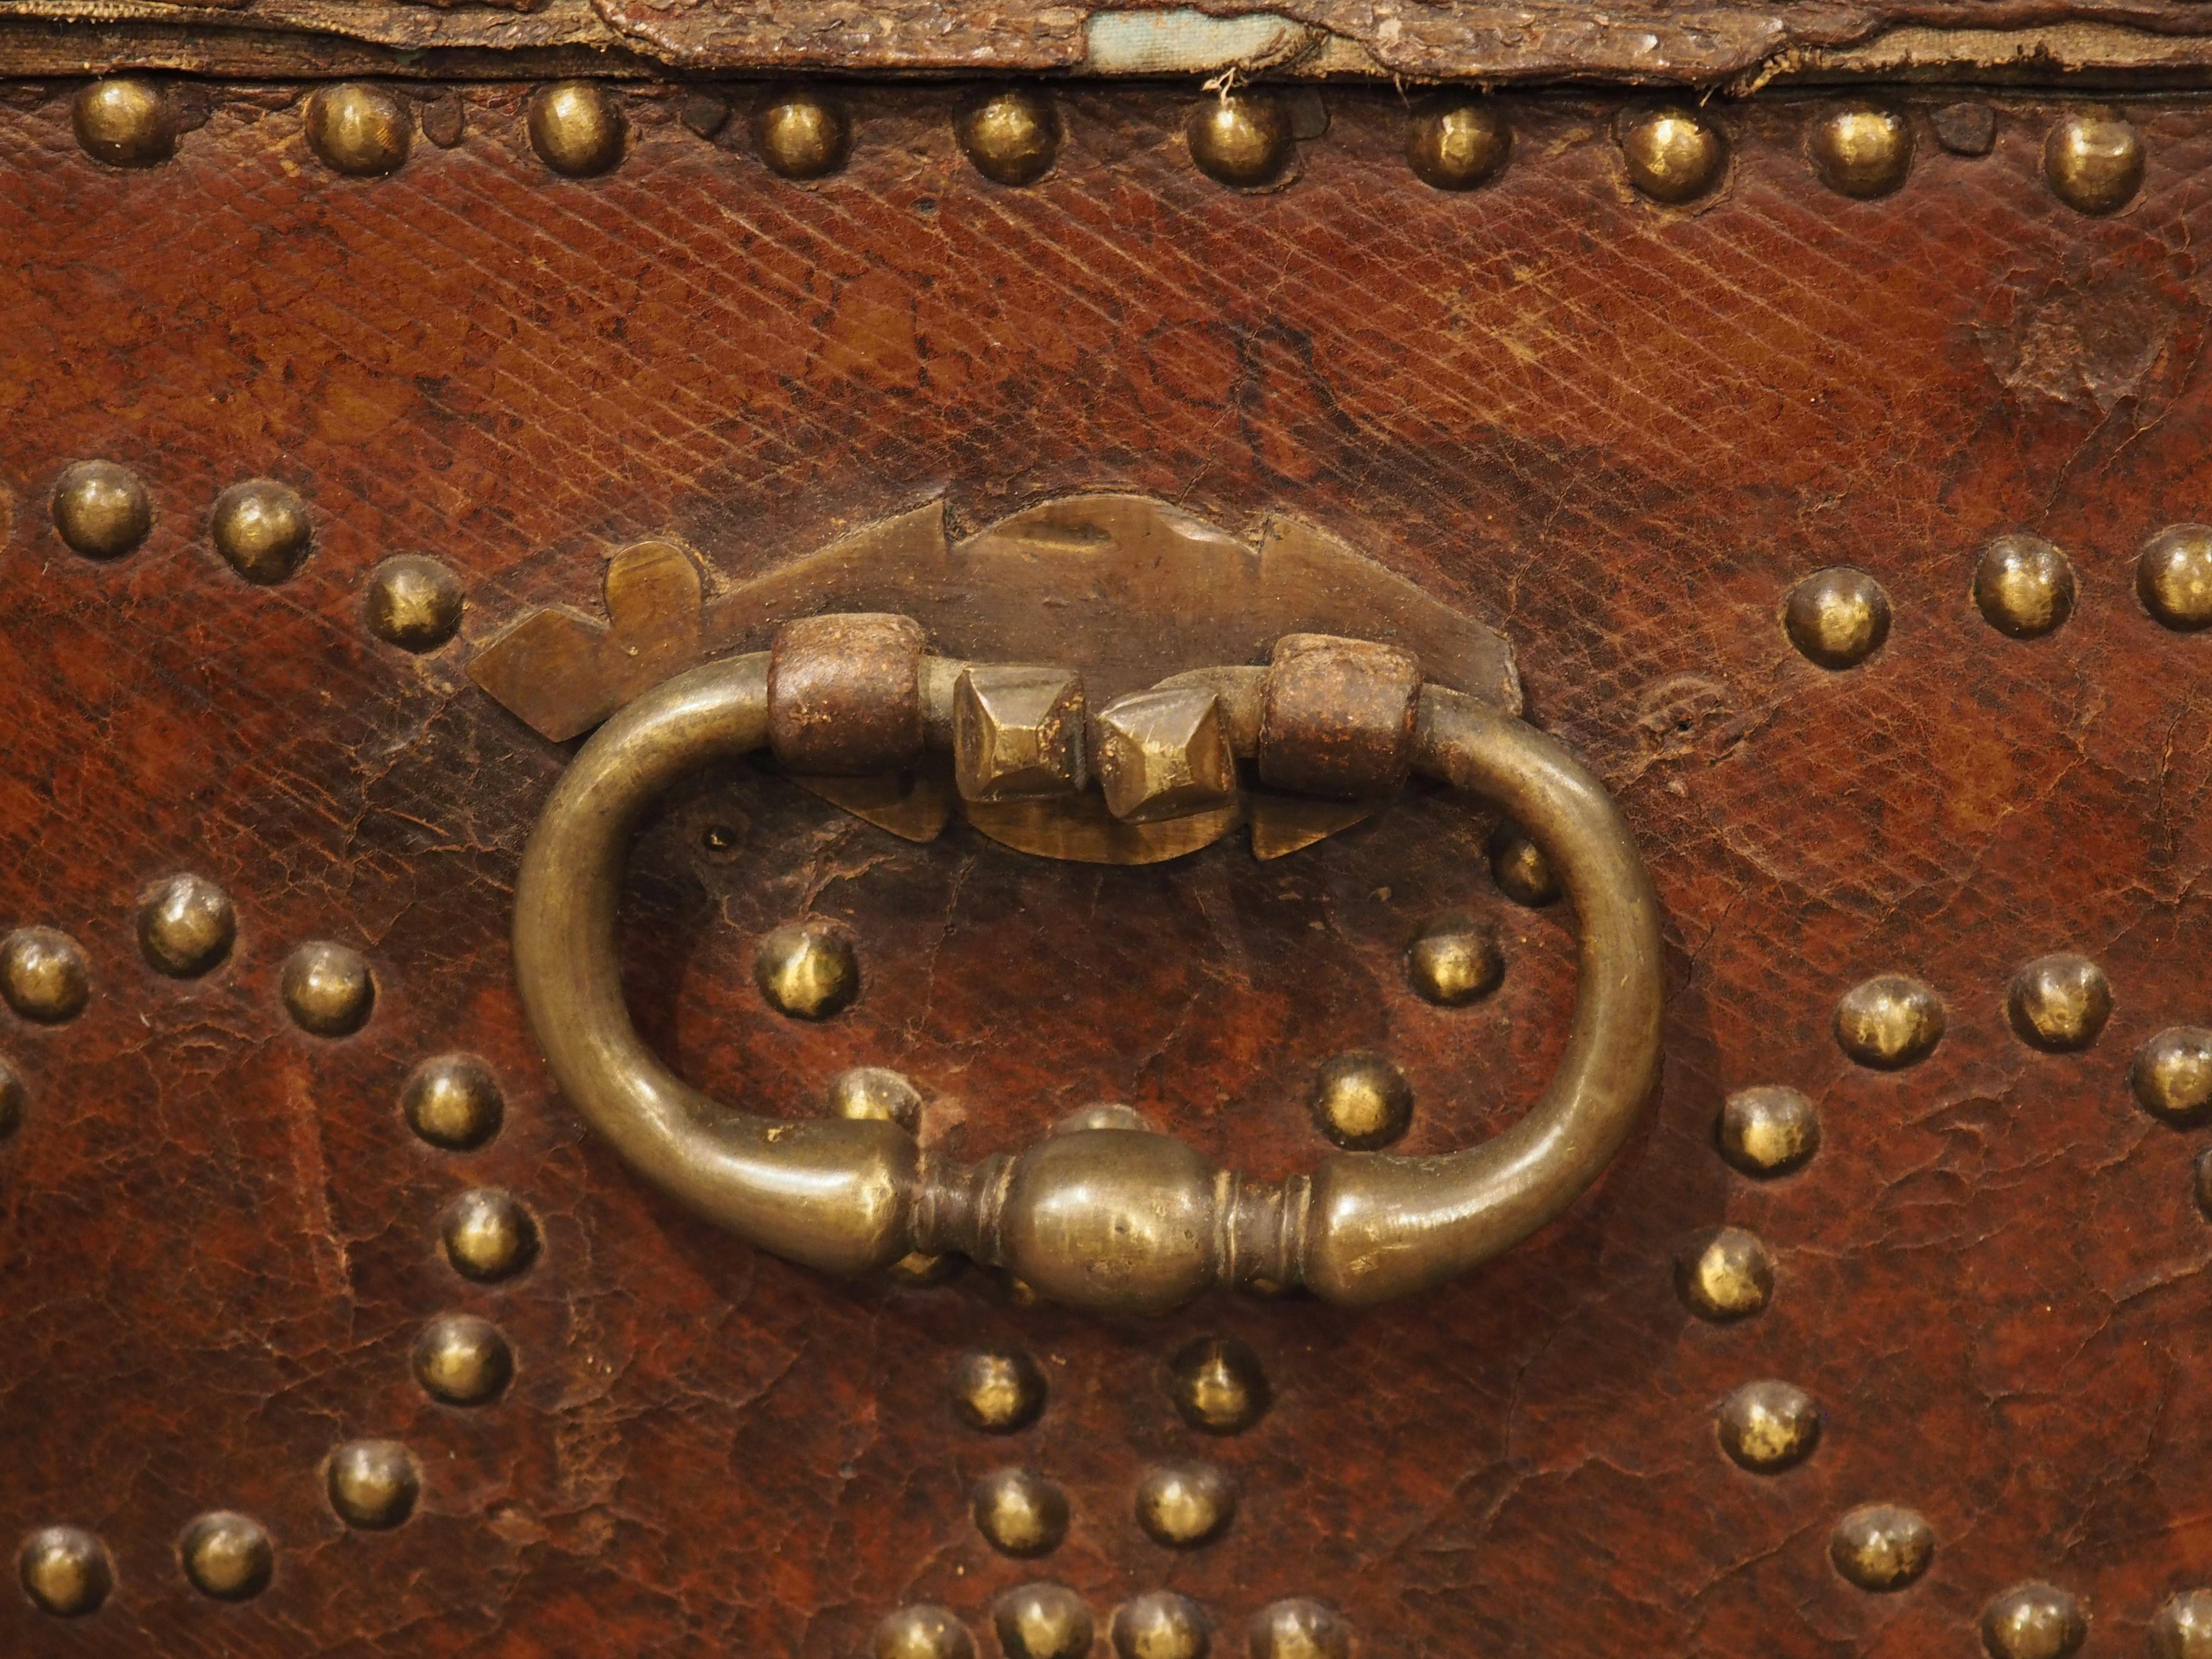 With two lockable compartments on the front façade, this studded leather trunk is a very unique storage piece. Hand-crafted in Spain during the 1700s, the trunk is well-engineered, with adequate storage space in the interior in addition to four